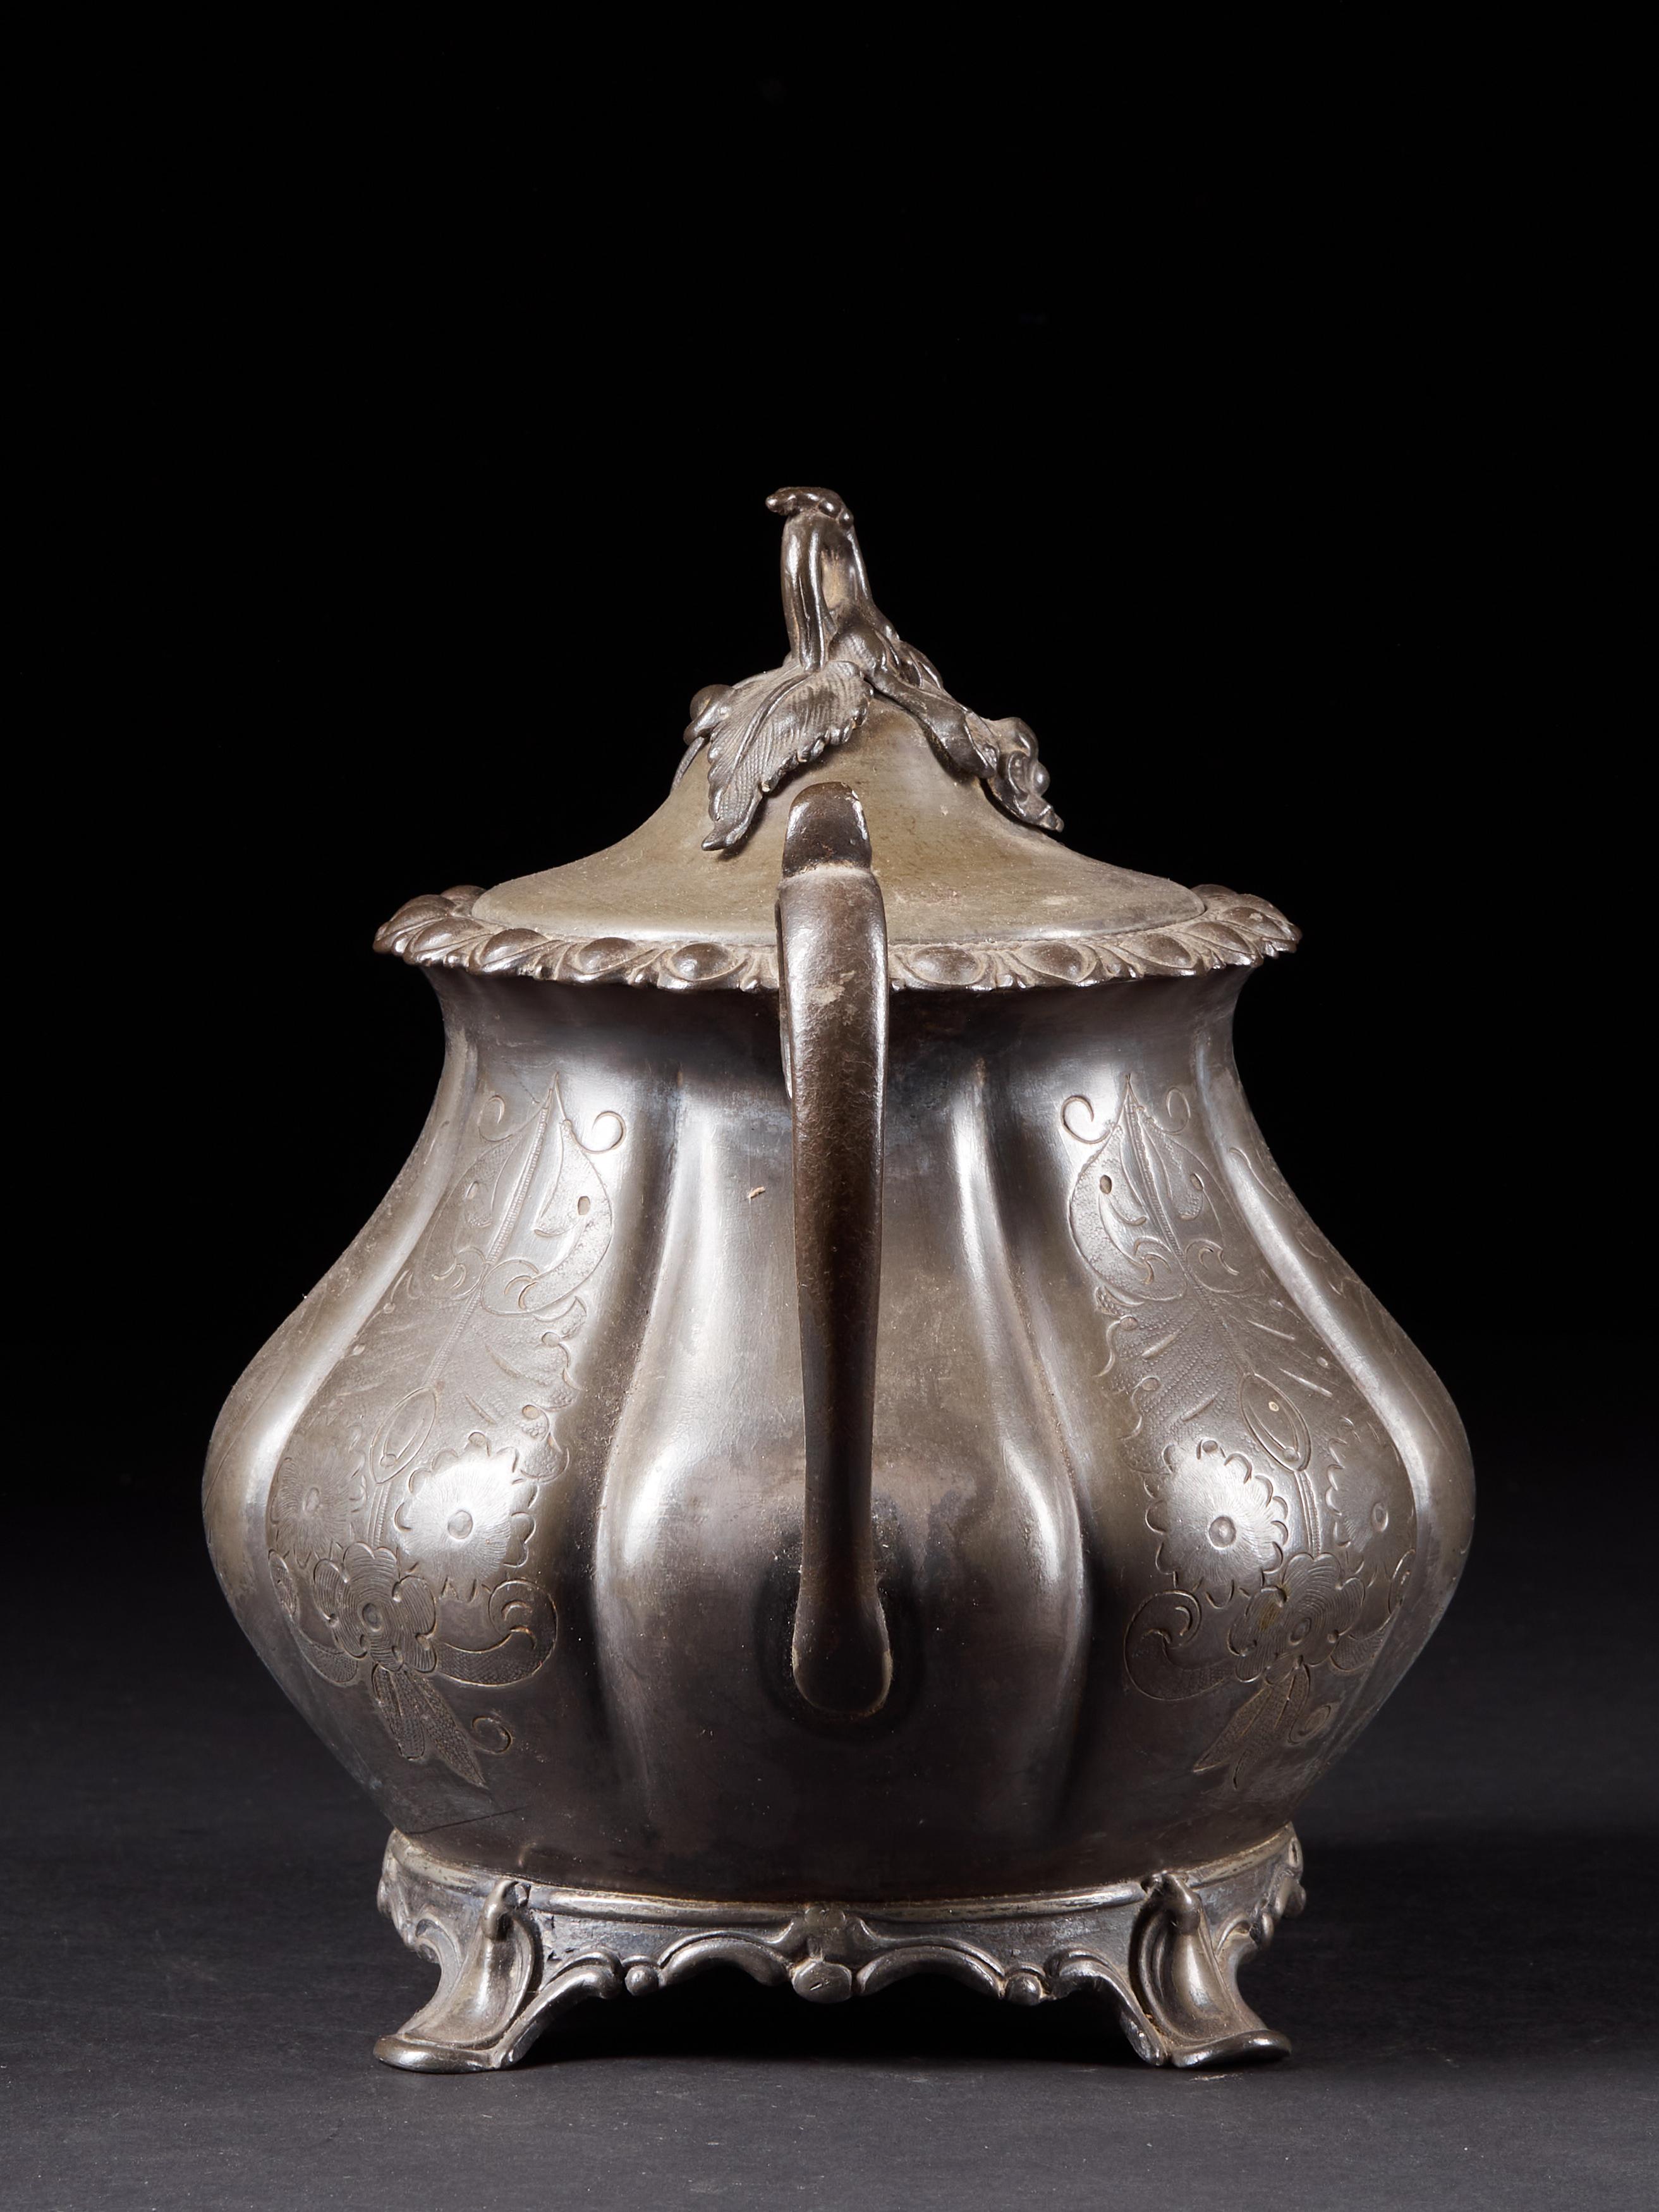 Made of pewter, this cream or sugar pot has a detailed flower bud handle on the lid. It also proudly displays several floral patterns. A lovely antique with a timeless charm showing a nice patina.